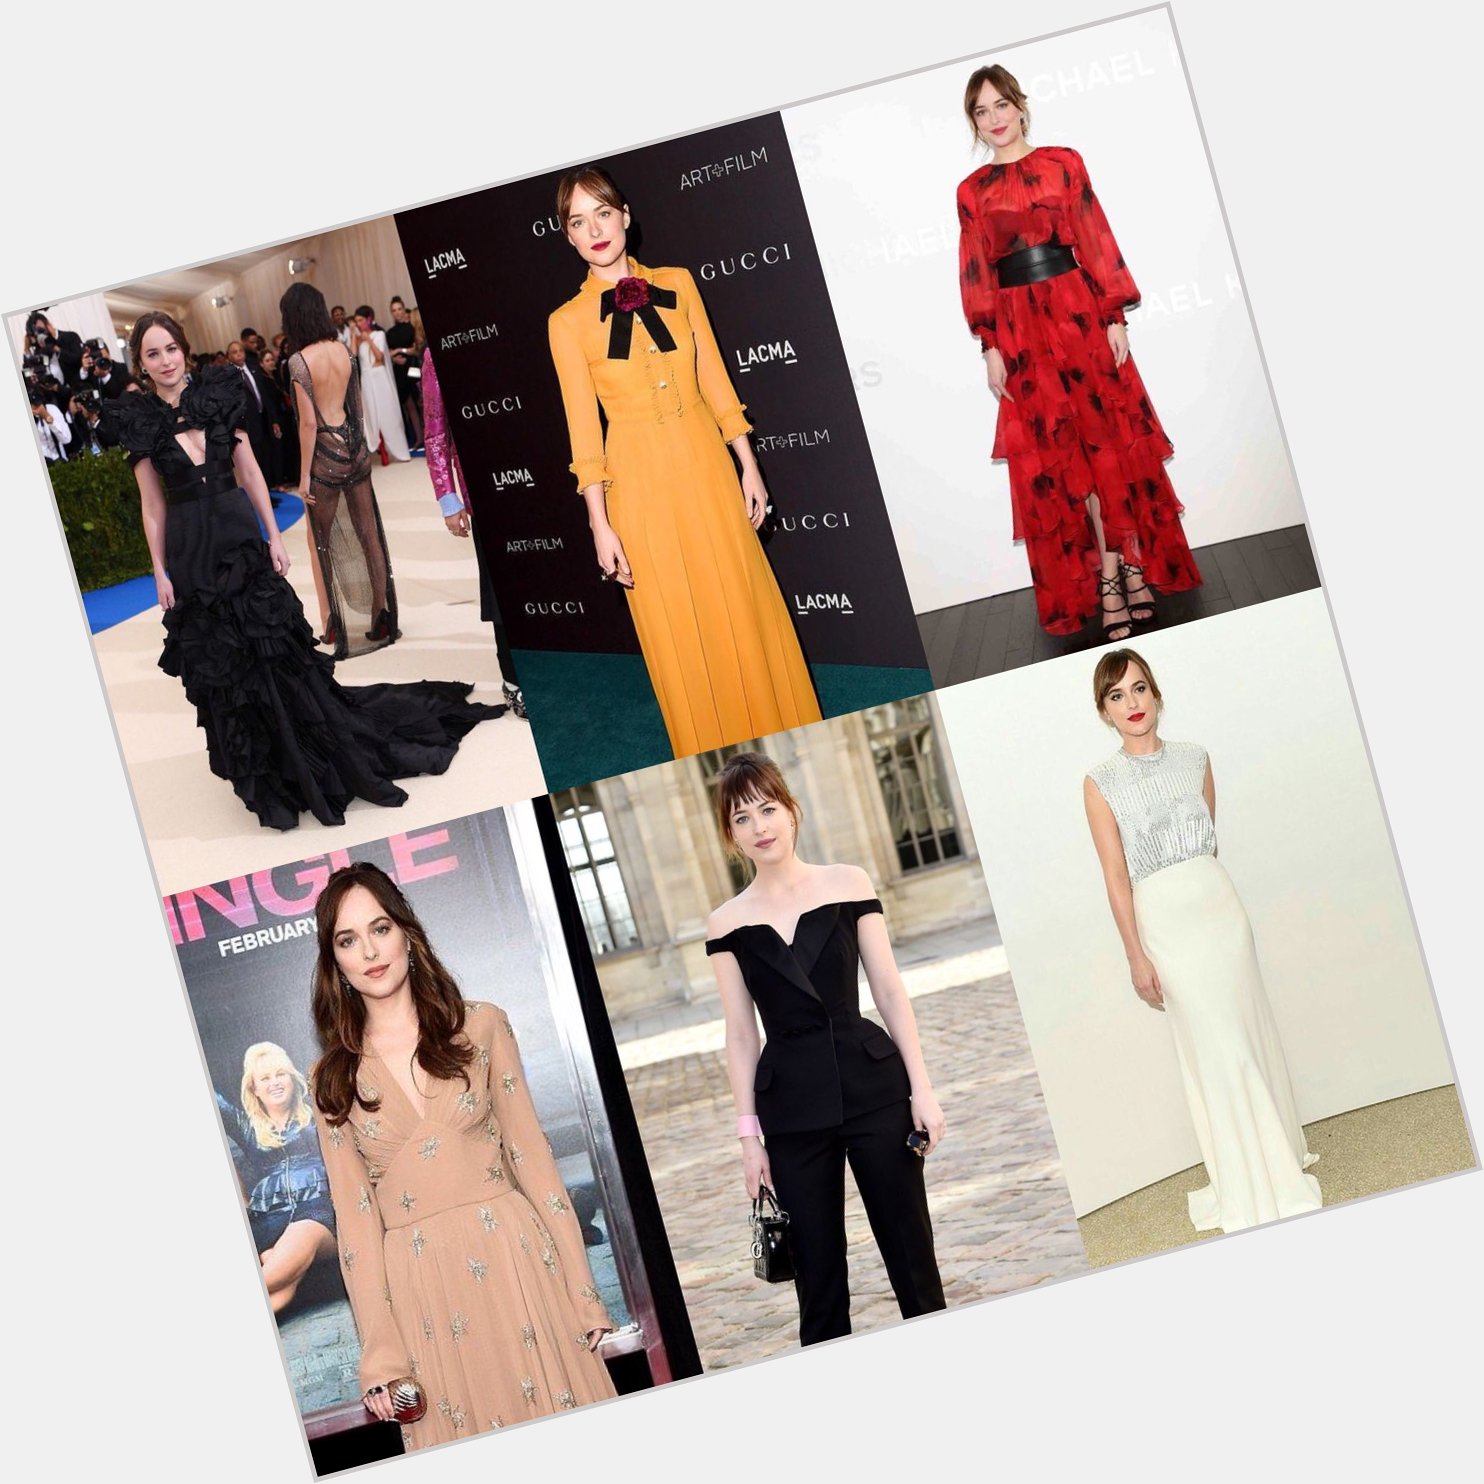 Happy birthday dakota johnson!! here are just some of my fave red carpet looks from my fave libra queen 